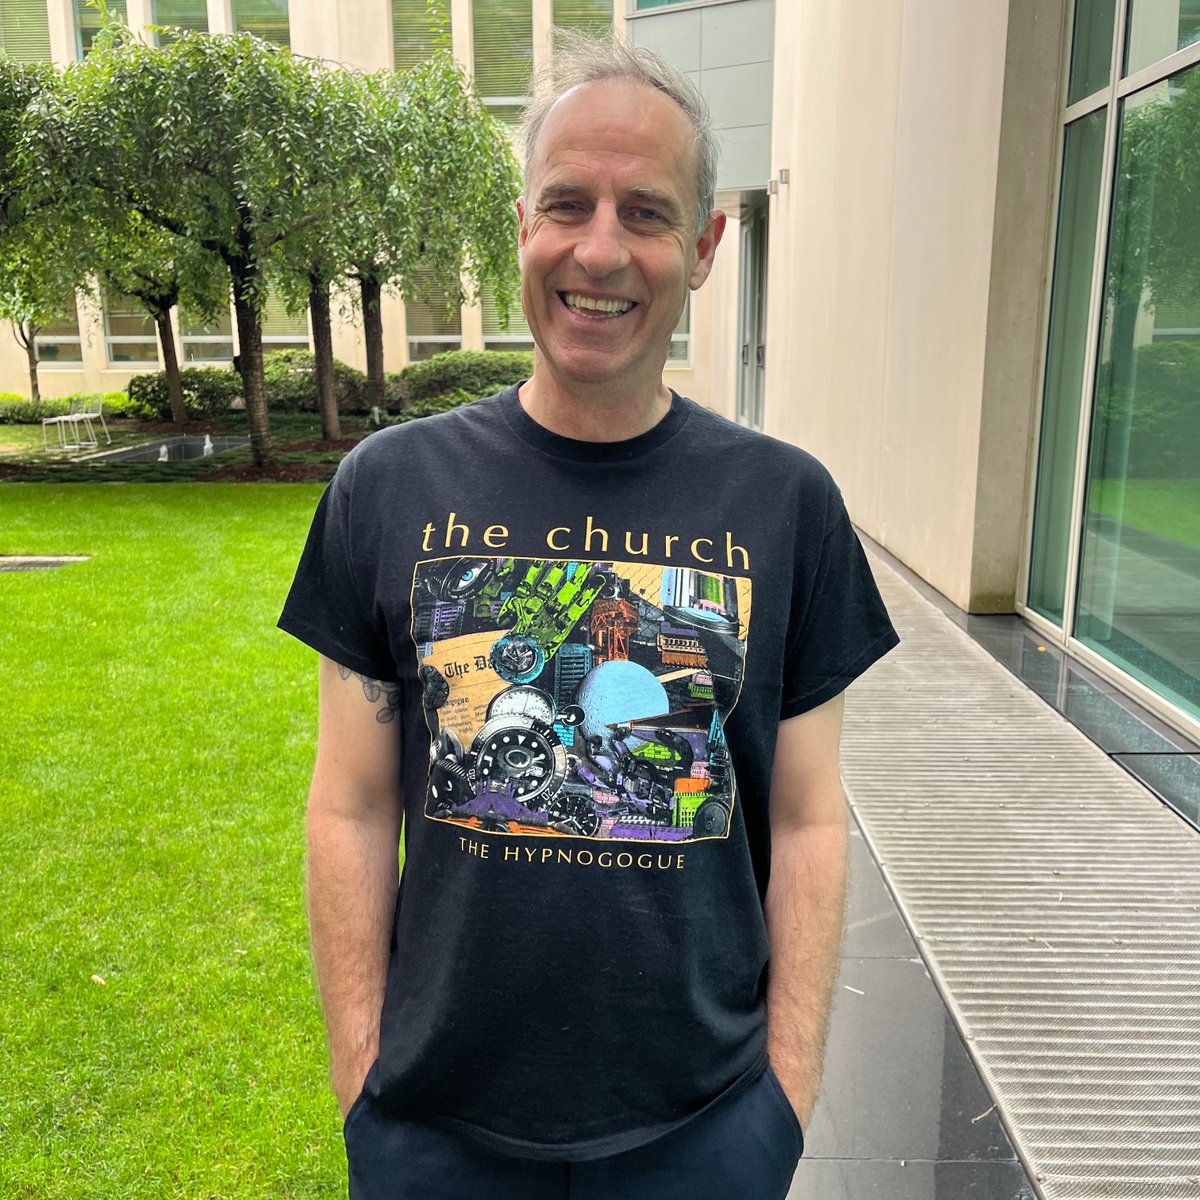 The only time you'll see me advocating for more of The Church in Parliament! But I guess I was caught in an unguarded moment. #AusMusicTshirtDay